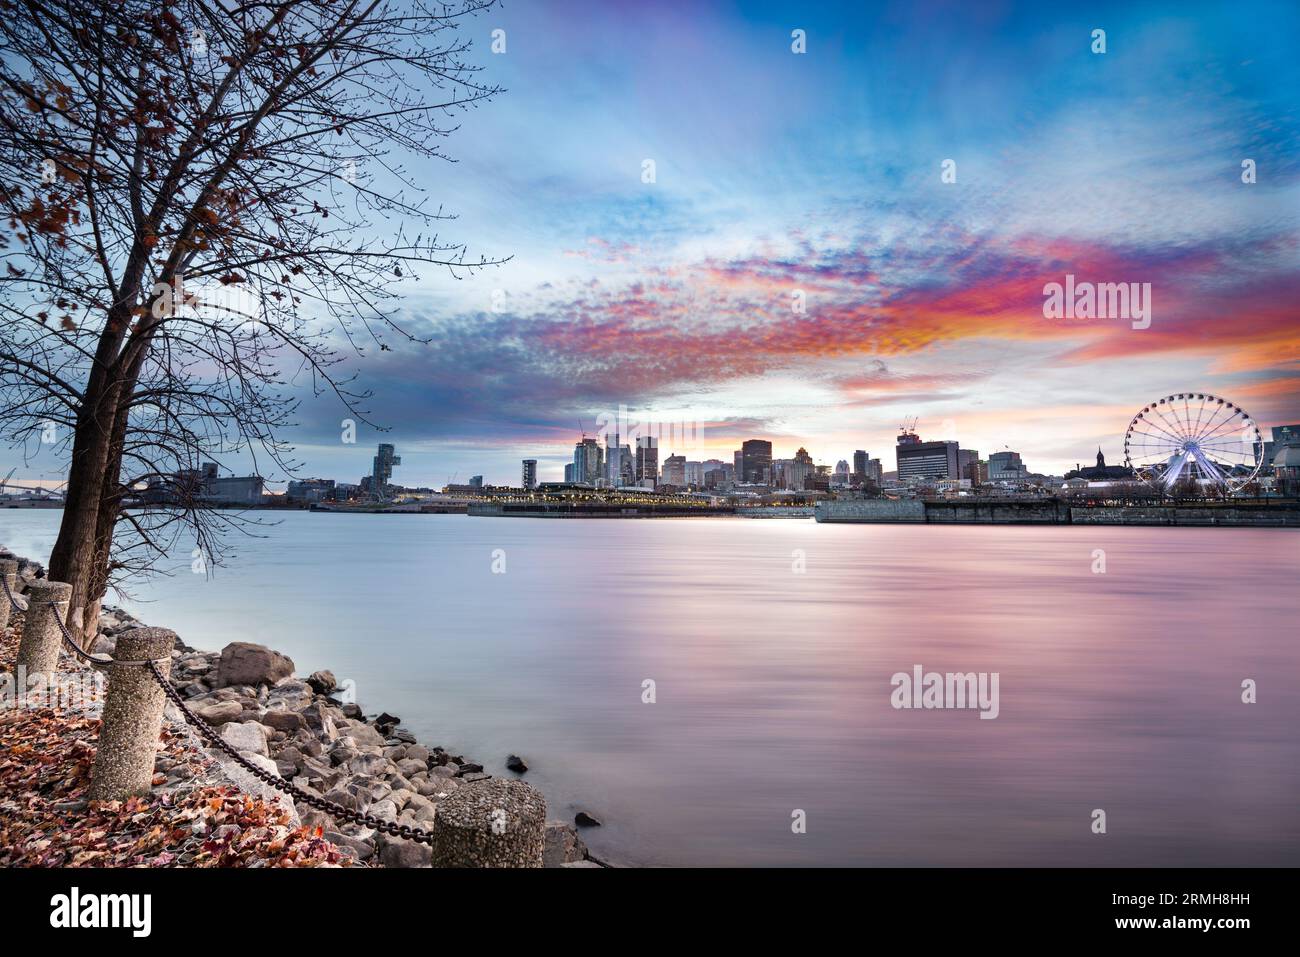 Montreal Canada city skyline at sunset with buildings and river in view. Stock Photo